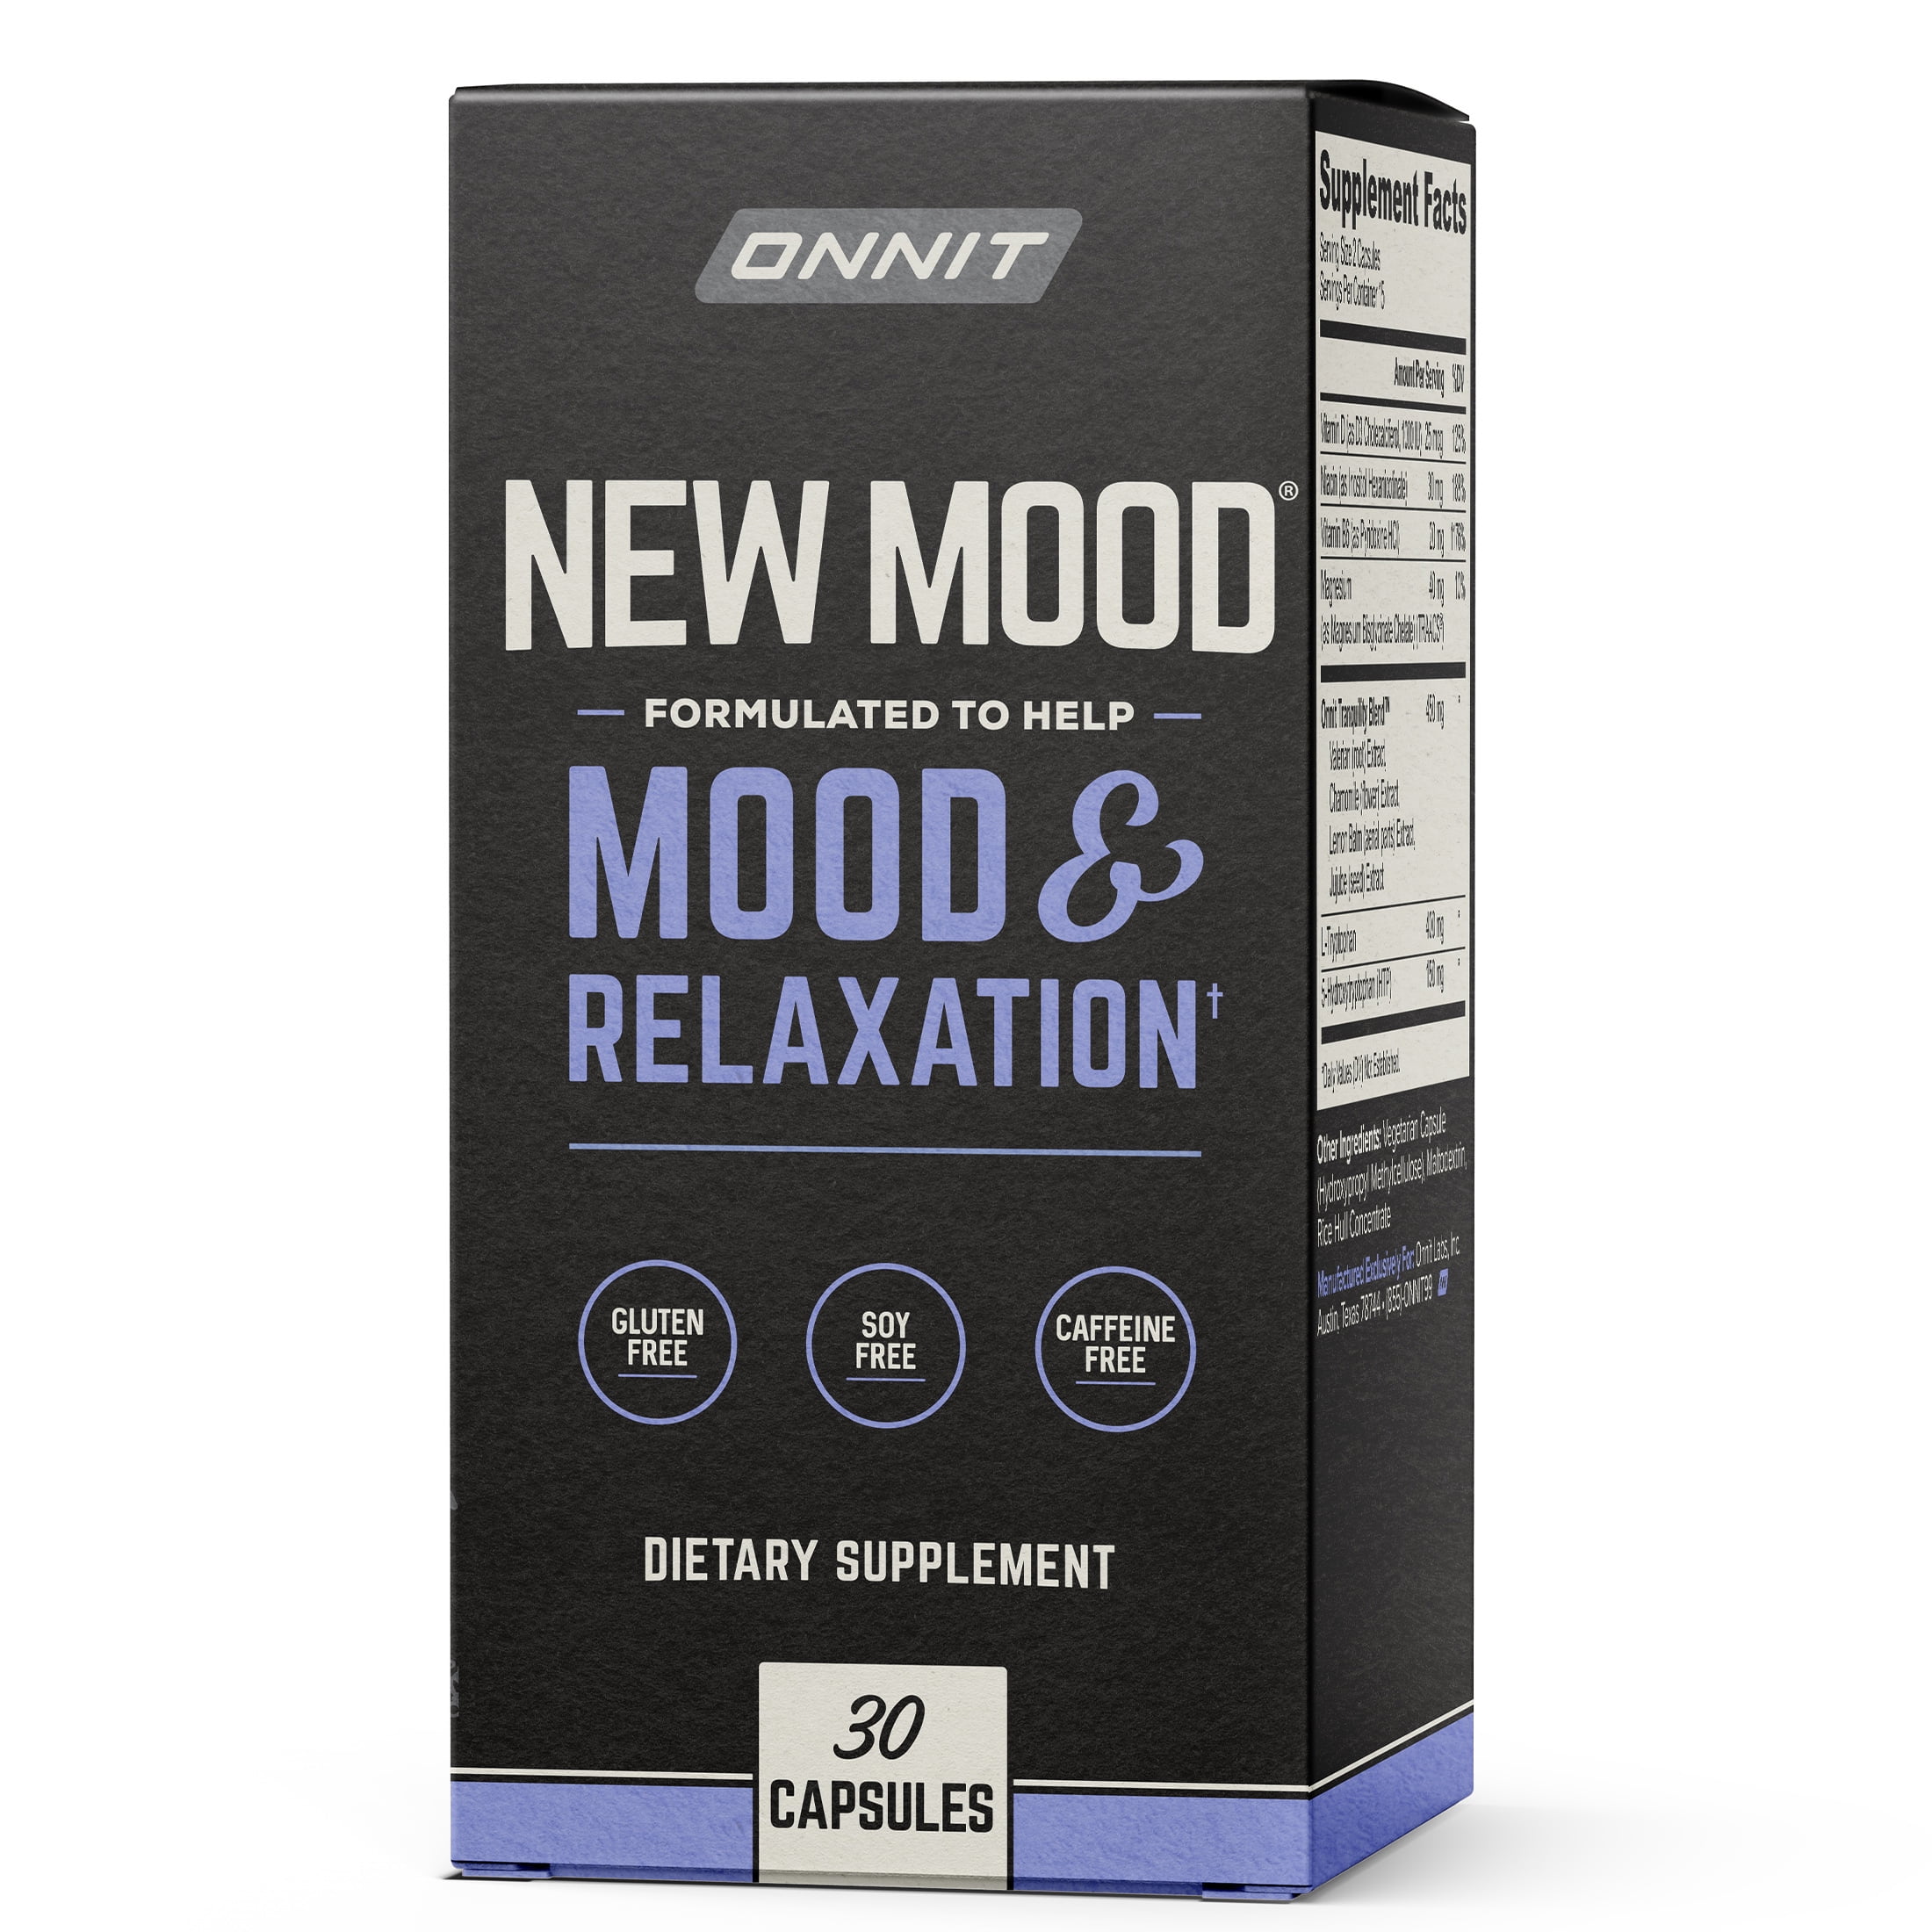 ONNIT New MOOD Daily Stress, Mood, and Relaxation Supplement Capsules- 30 Ct